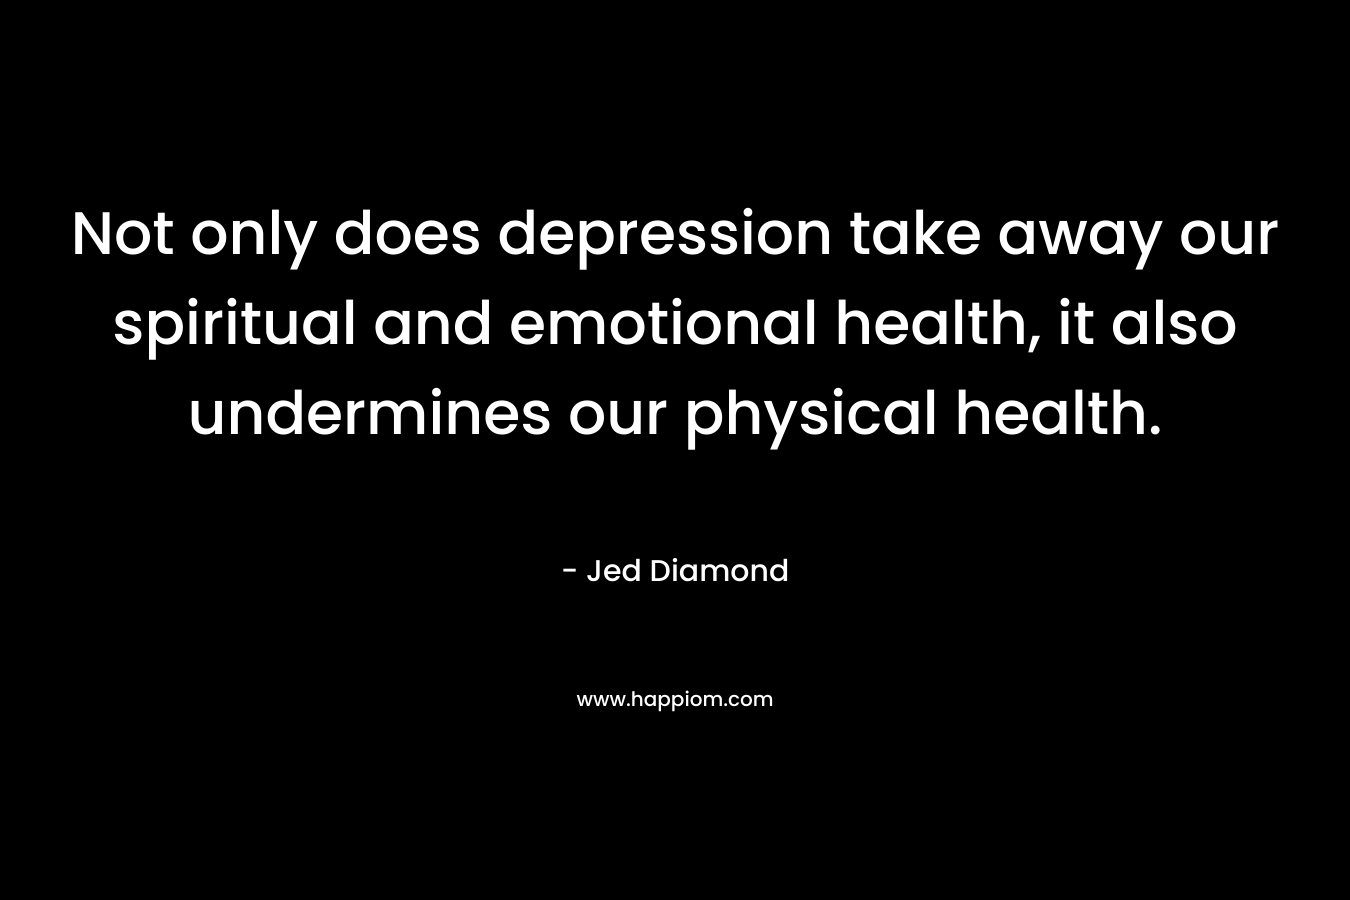 Not only does depression take away our spiritual and emotional health, it also undermines our physical health. – Jed Diamond